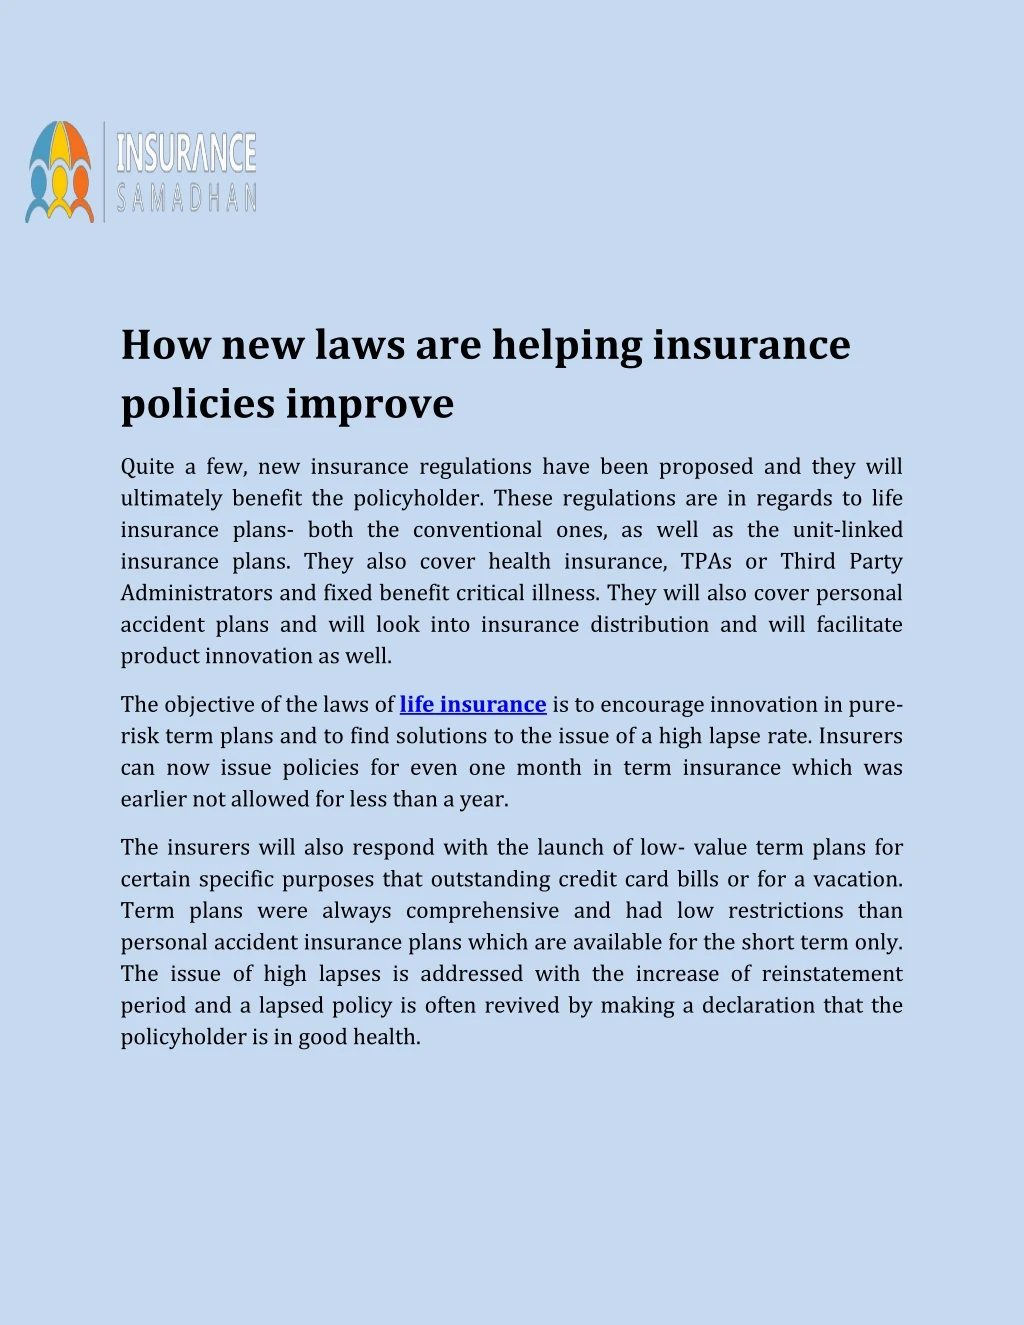 how new laws are helping insurance policies